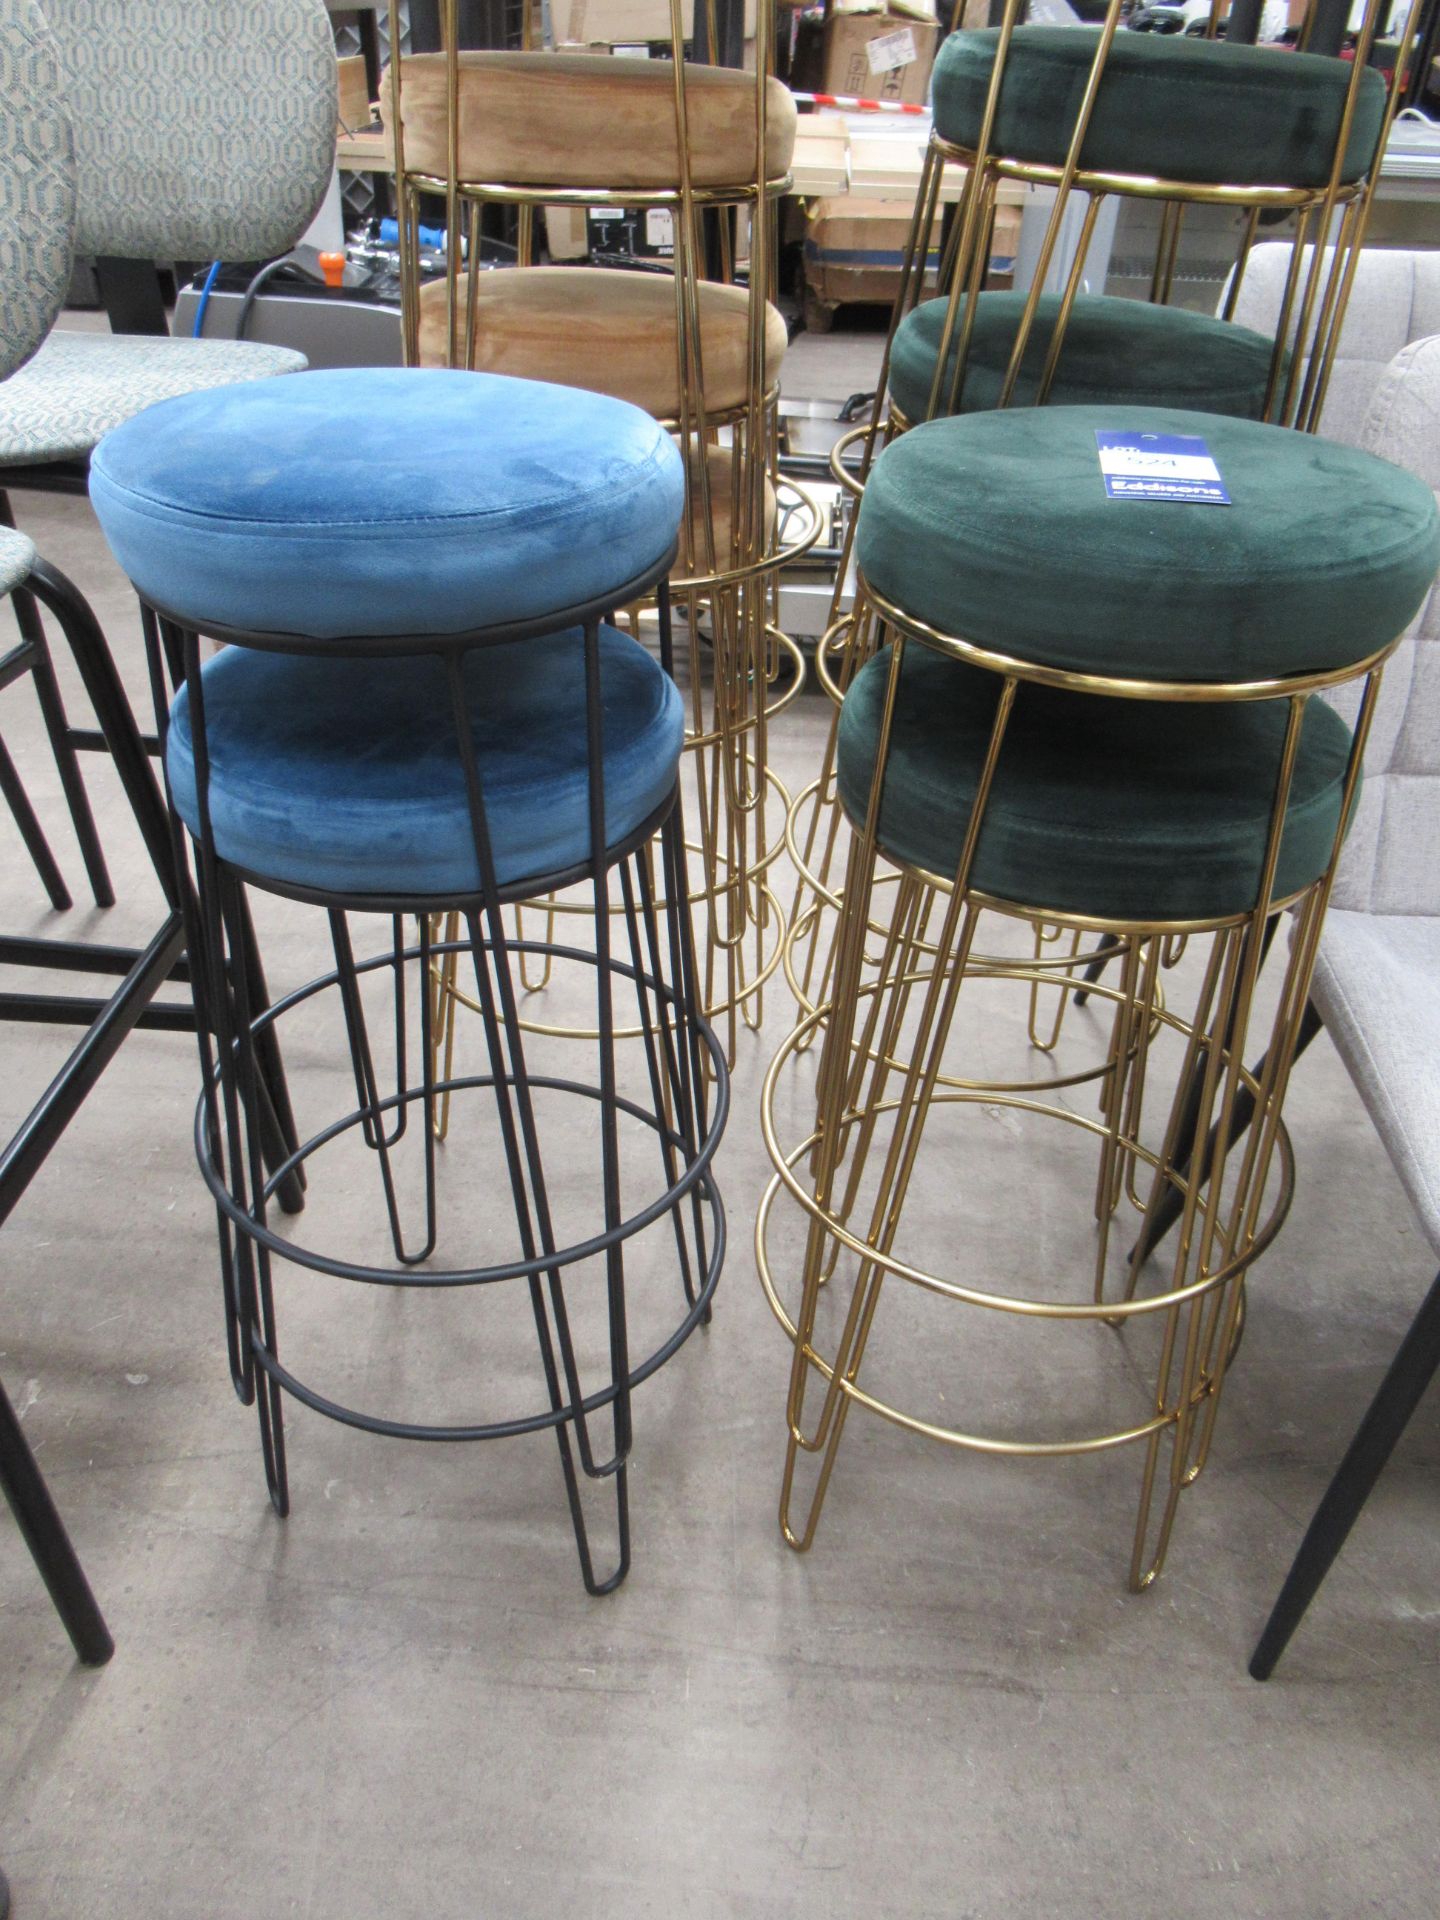 12x Suede Effect Stools - Image 7 of 7